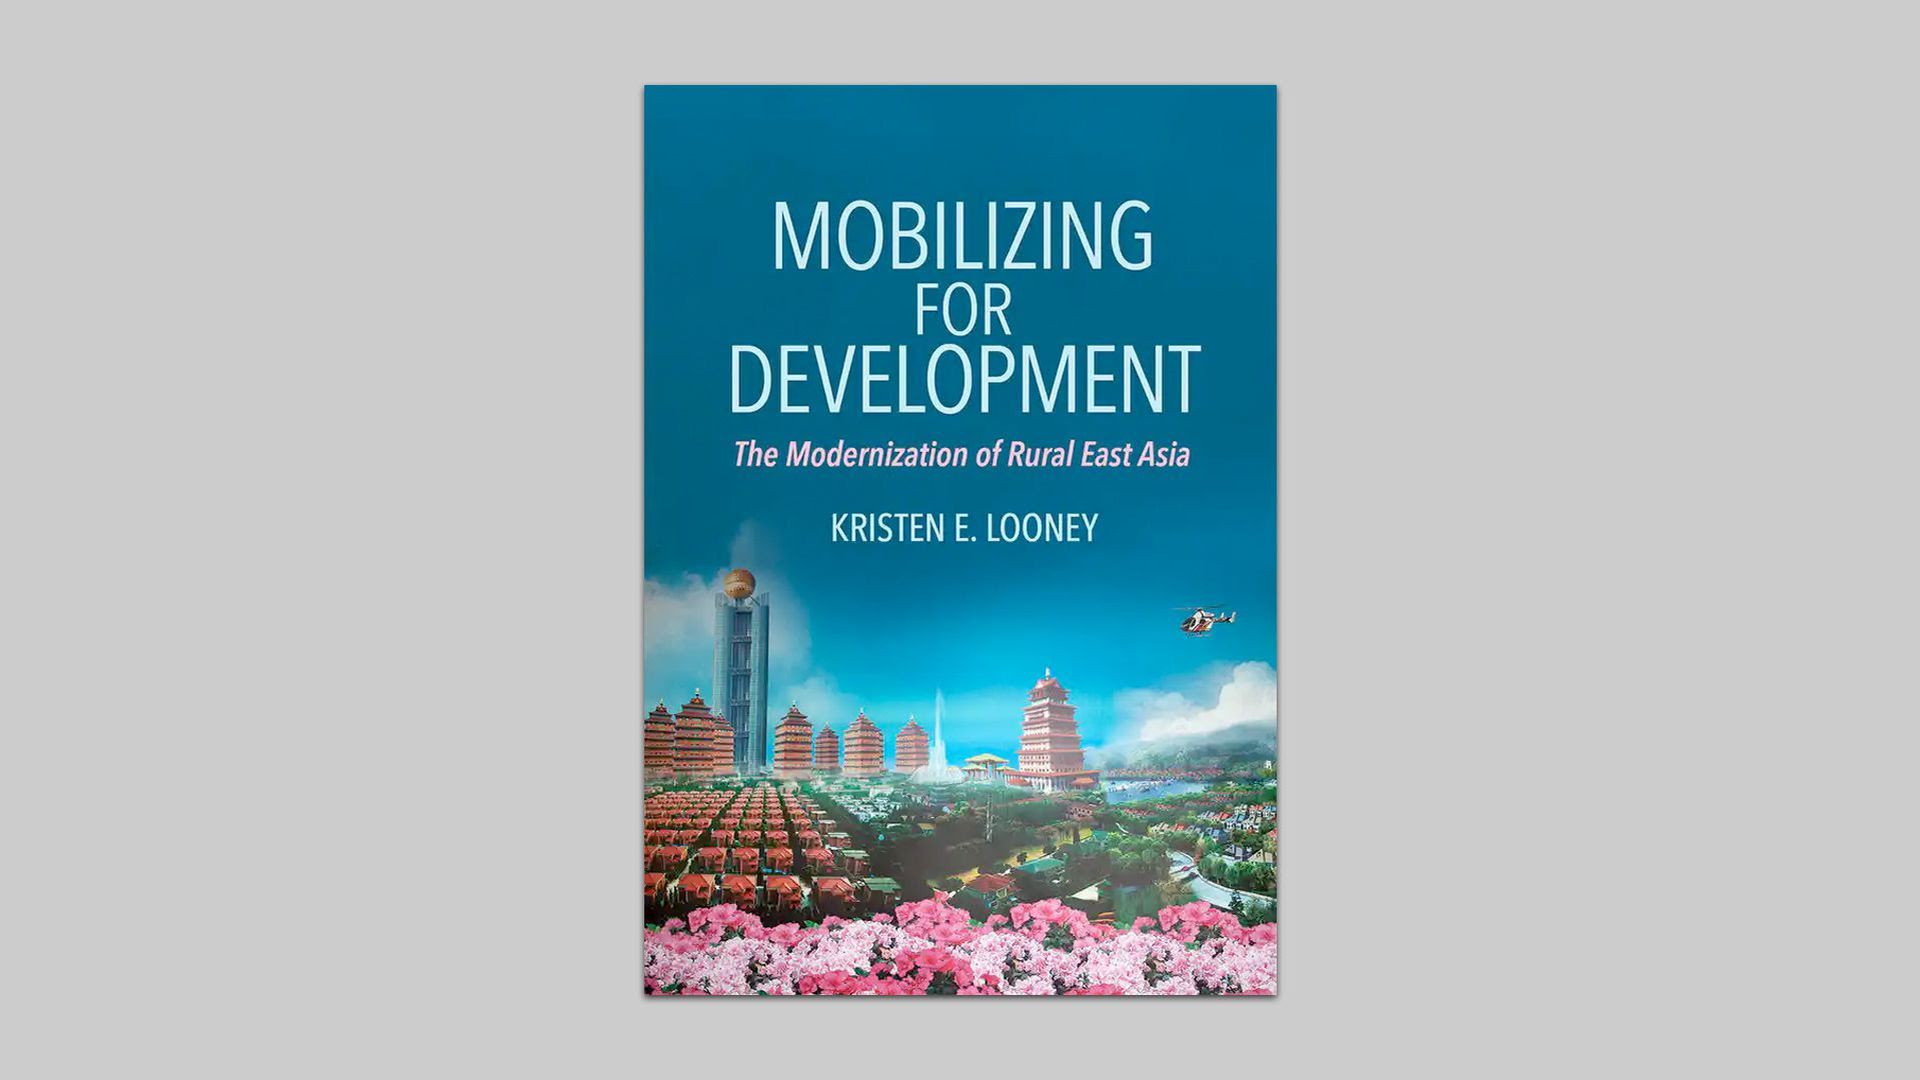 The cover of the book, "Mobilizing for Devlopment"